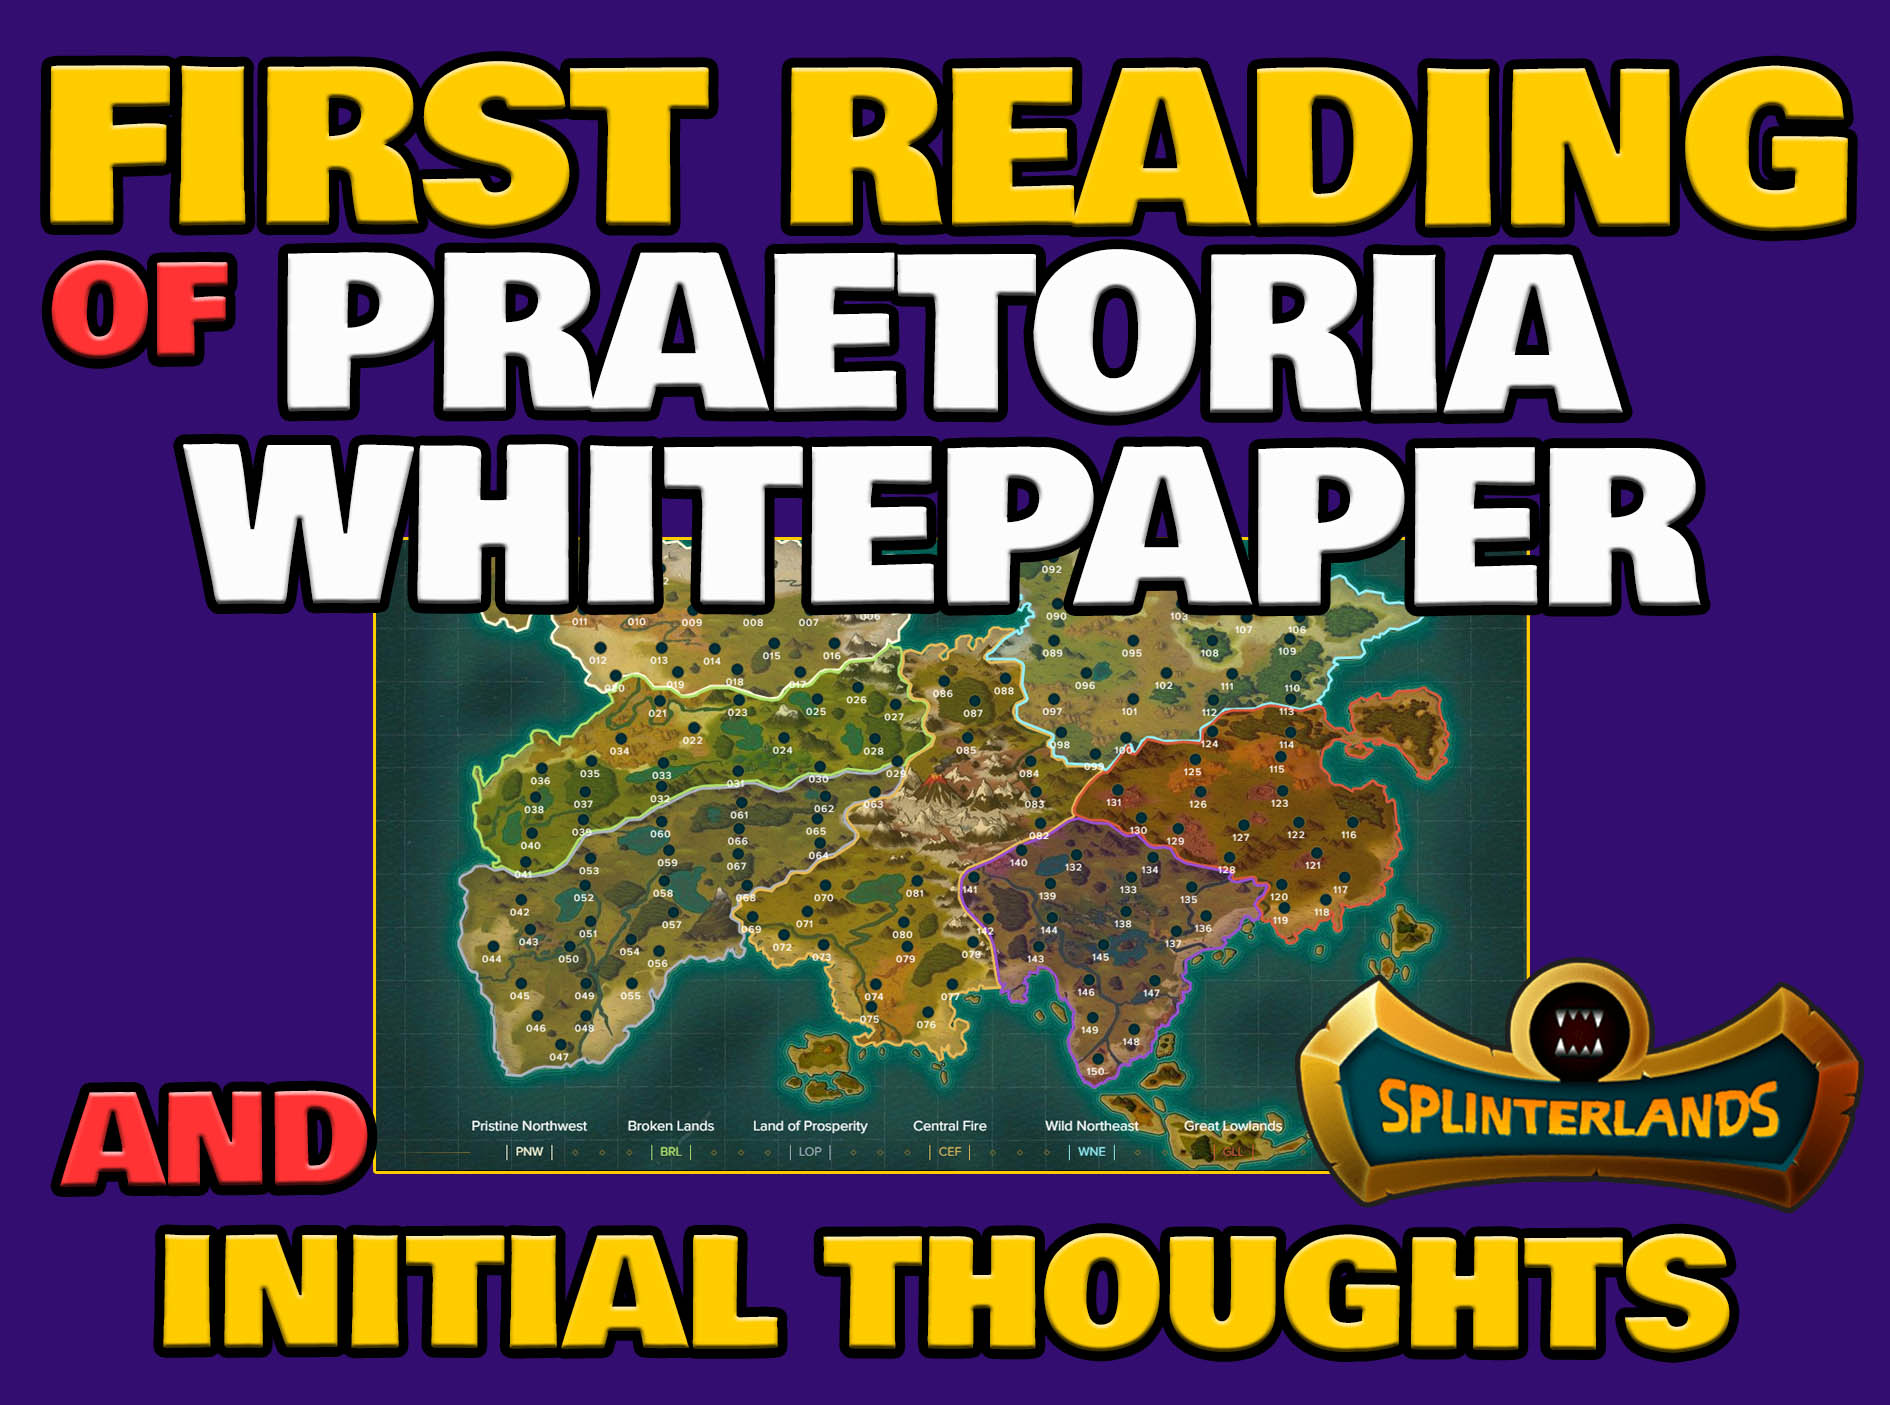 @libertycrypto27/a-first-reading-of-splinterlands-lands-whitepaper-and-some-initial-thoughts-engita